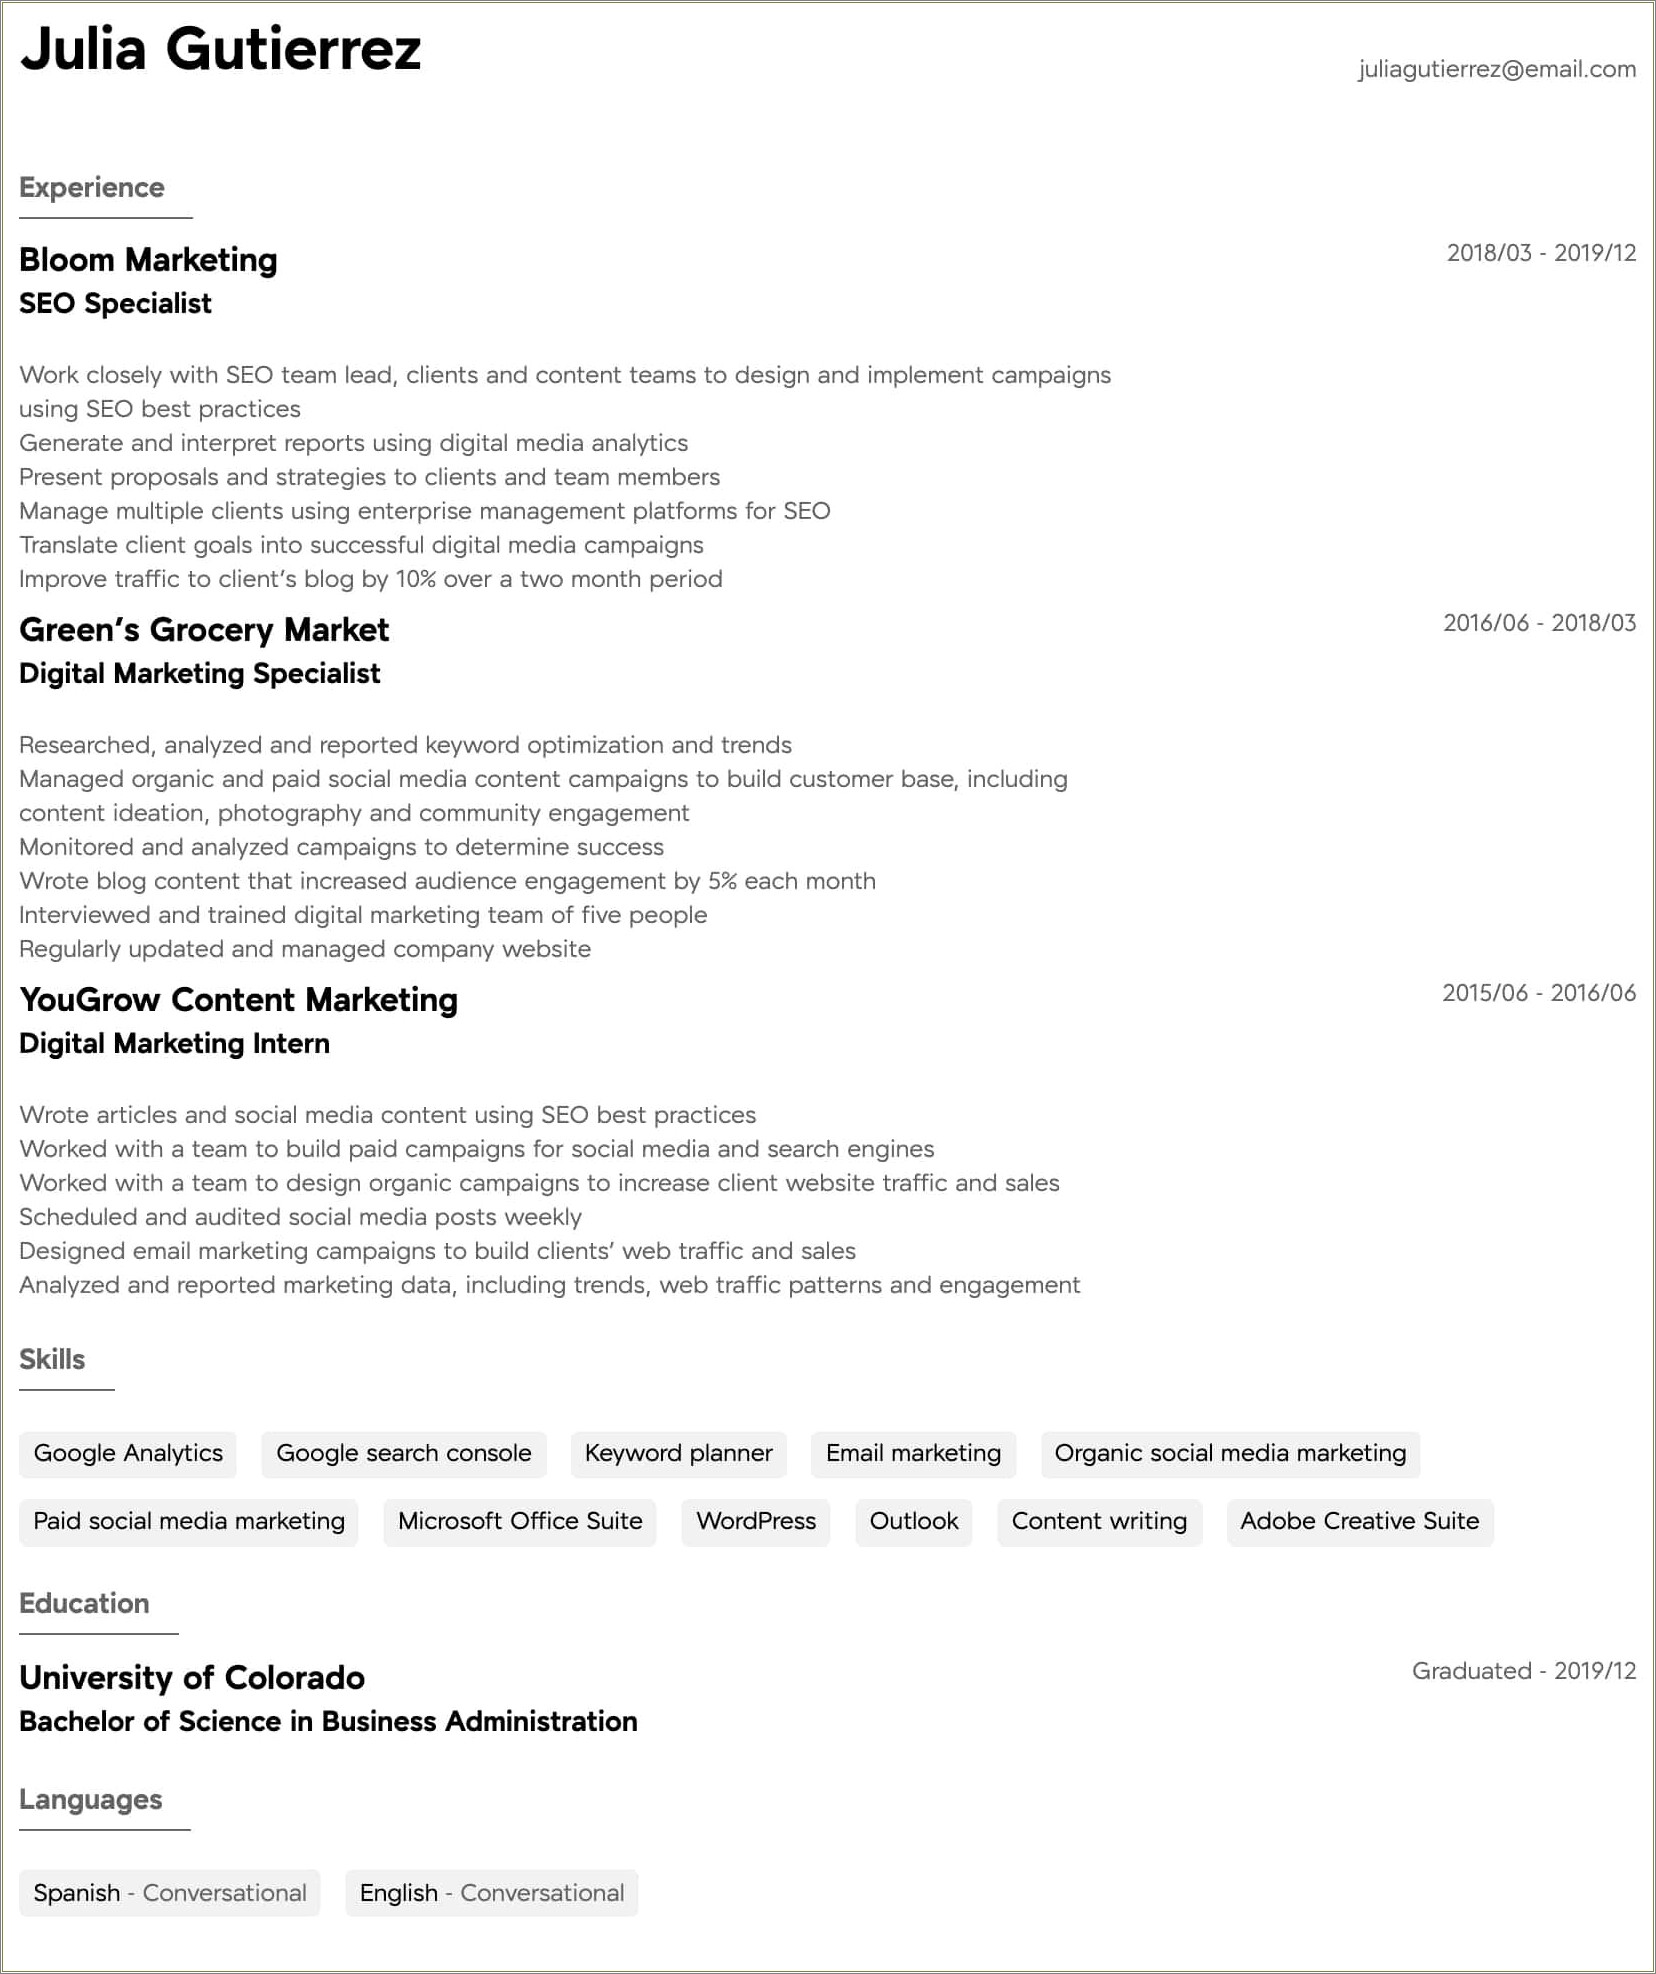 Sample Resume For Search Engine Optimization